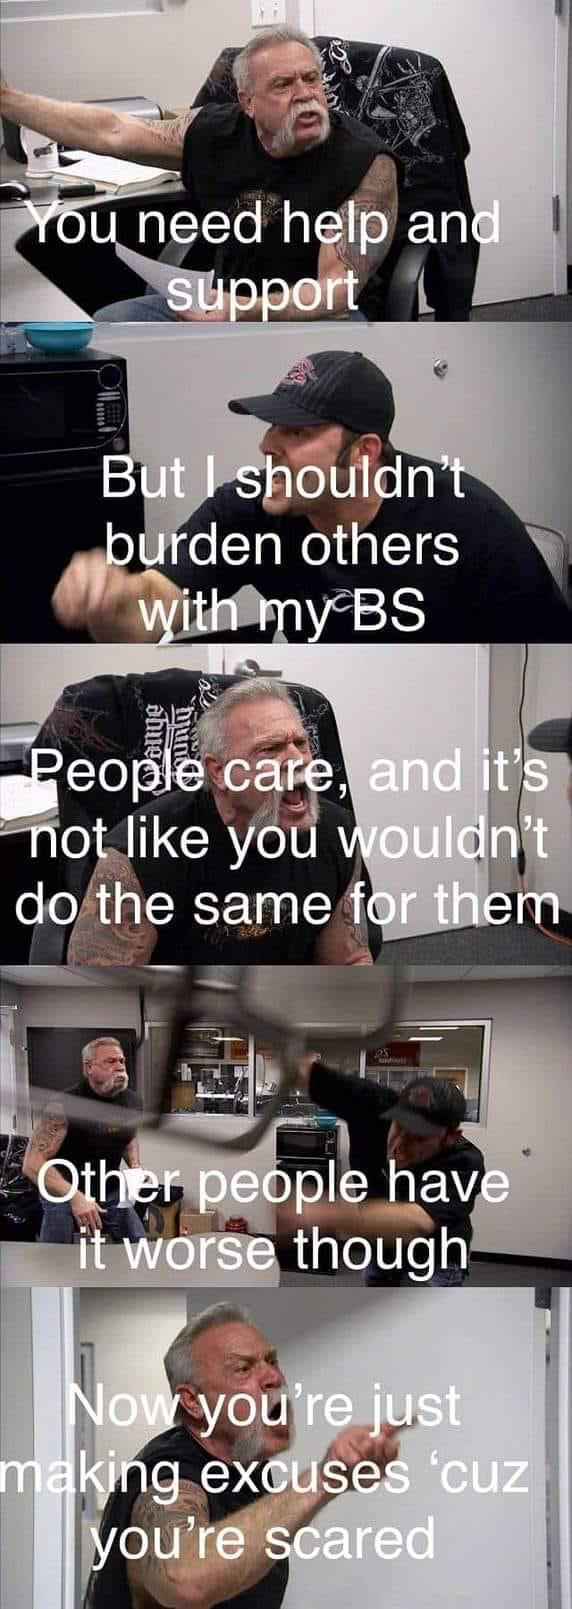 best wholesome meme - meow i literally just fed you - You need help and support But I shouldn't burden others with myBS abue Uud People care, and it's not you wouldn't do the same for them Other people have it worse though Now you're just making excuses '